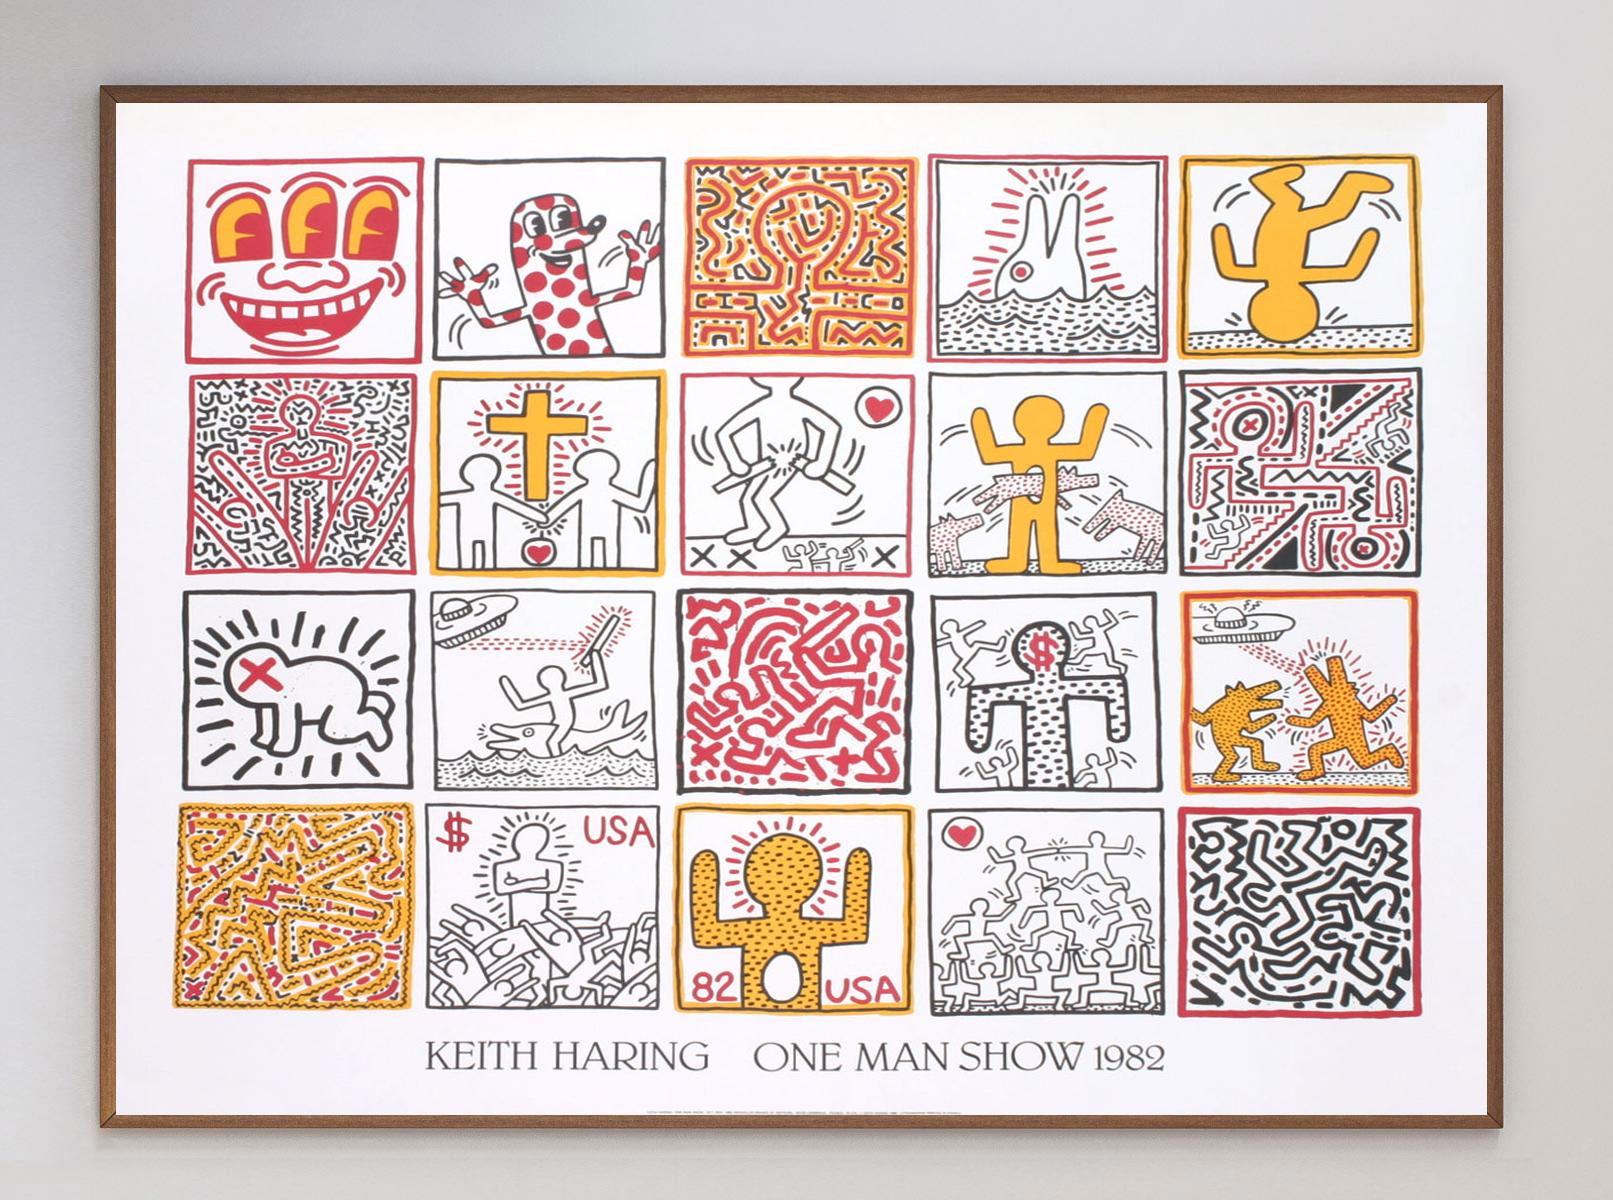 Beautiful lithograph printed by Nouvelles Images in 1986, depicting 20 of Keith Haring's artworks for the 